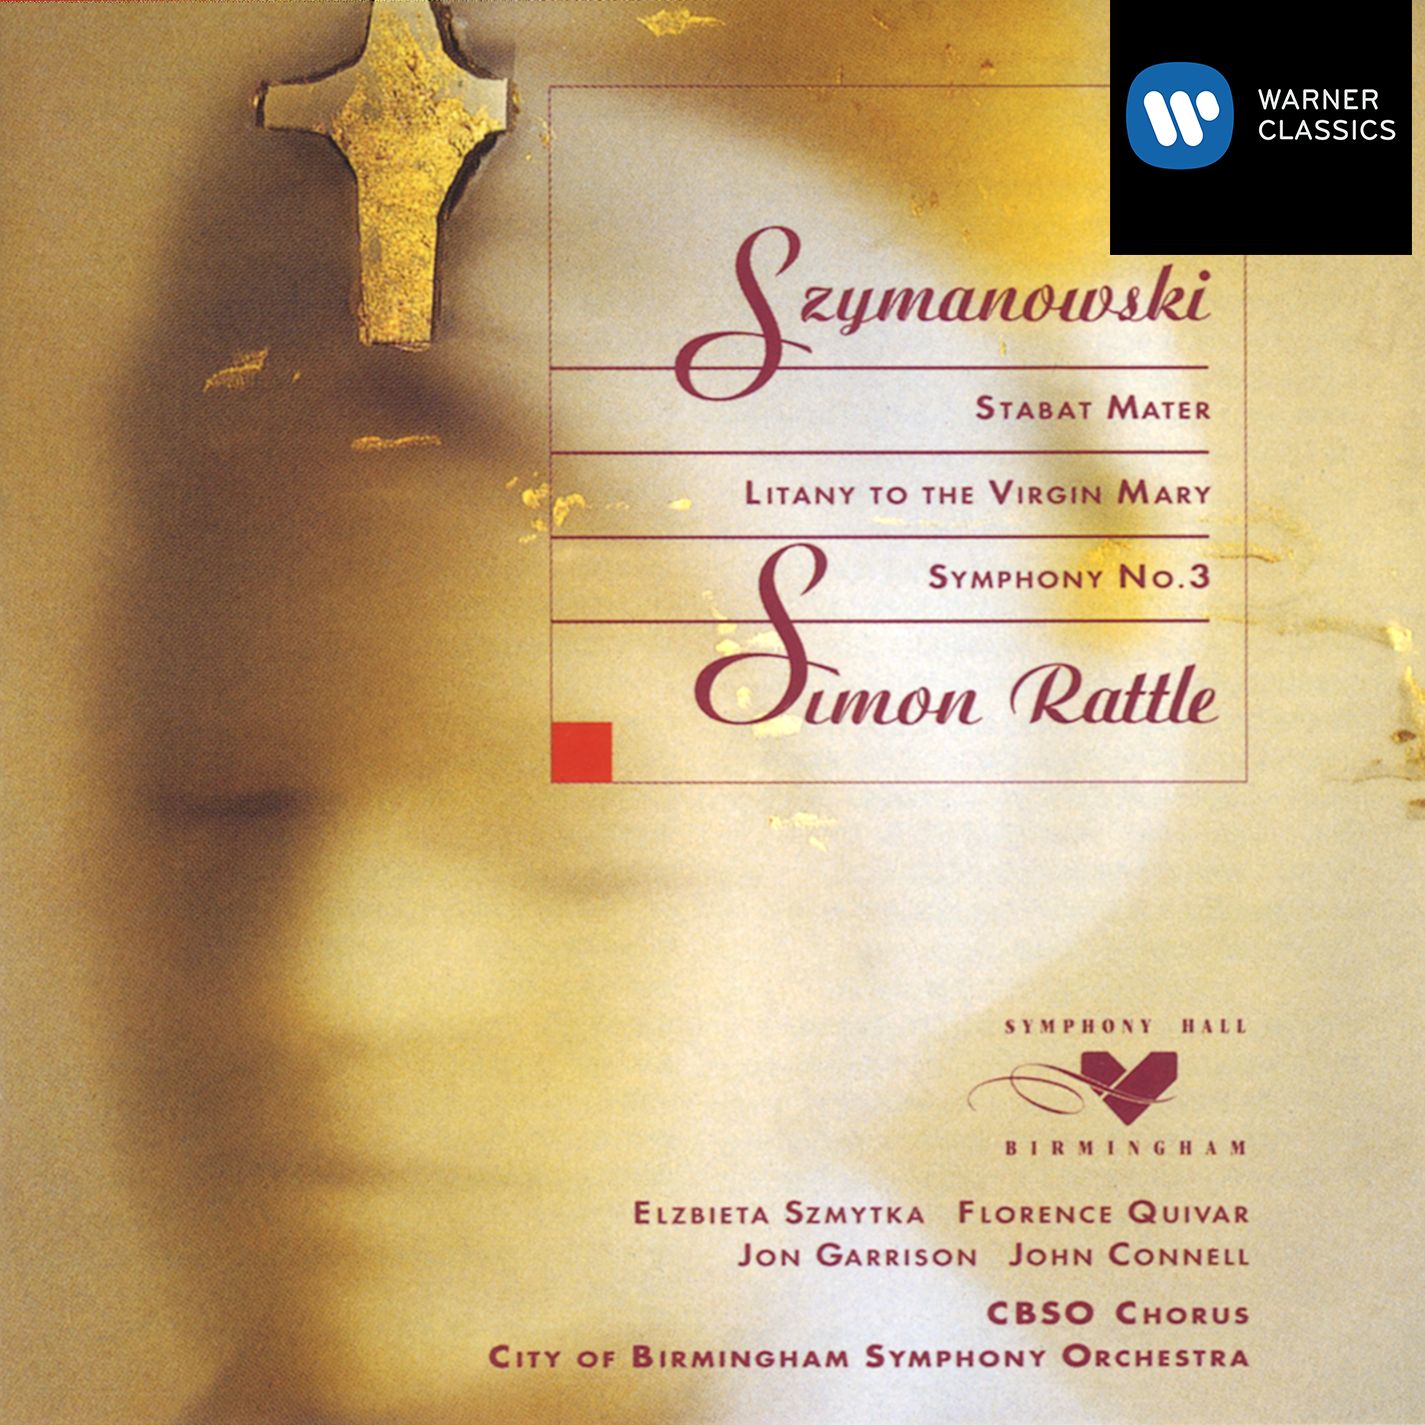 Symphony No. 3, Op.27 'Song of the Night' (Piesn o nocy): III. Largo (Jak cicho. Inni spia...)